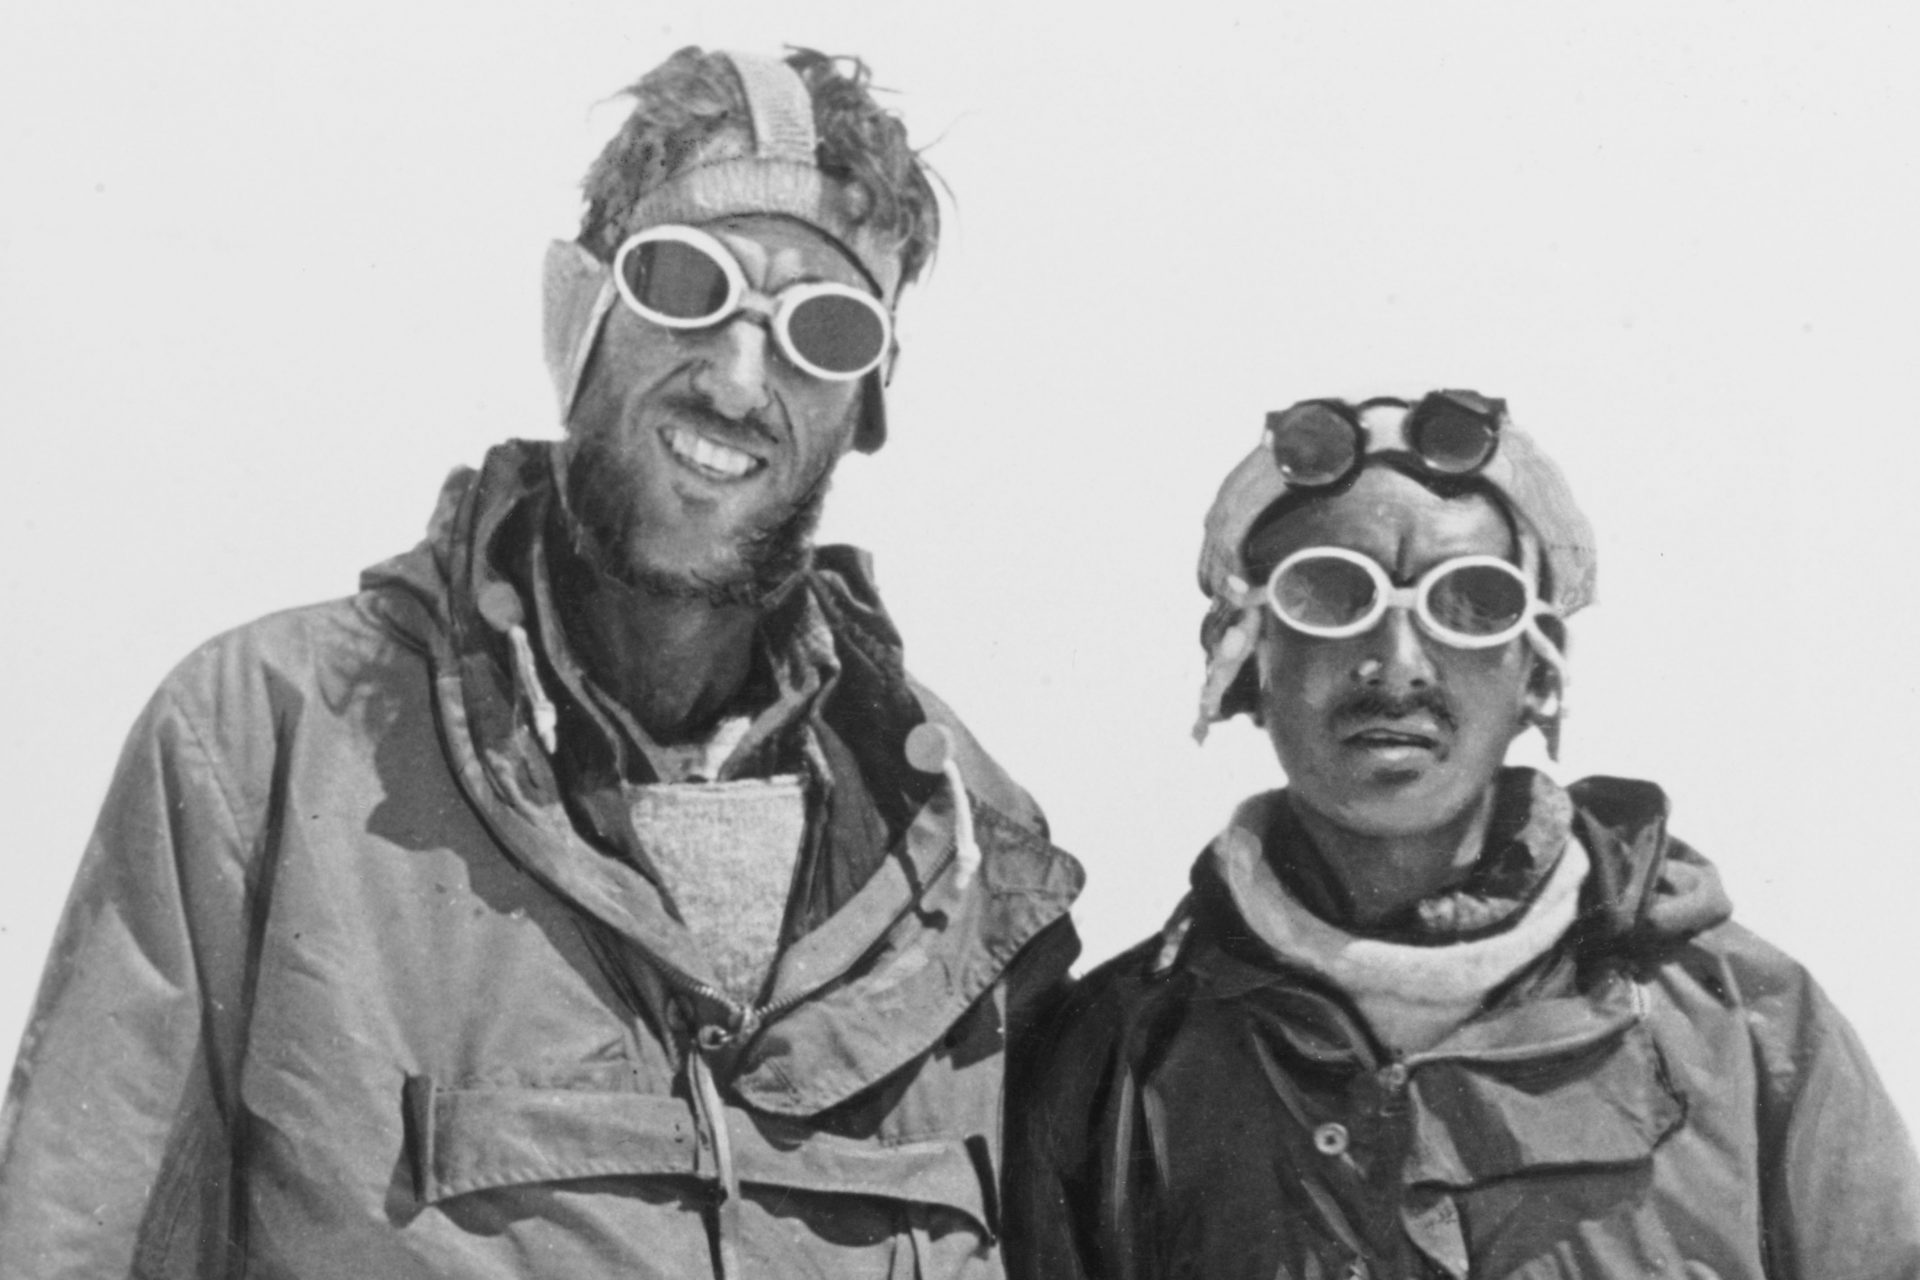 <p>However, the yeti has had a few  exceptional witnesses: Sir Edmund Hillary and Sherpa Tenzing Norgay (in the image), the first ever climbers who reached Everest’s summit. And Reinhold Messner, the first person to climb 14 summits of the Himalayas without oxygen.</p> <p><a href="https://www.msn.com/en-us/channel/source/The%20Daily%20Digest/sr-vid-m9m4jvvns2j07r8ryna4ukyusv9y69vg8cgntexr4kid2uw7wgvs?cvid=dd9971d580f24d2fbeb8cf0687eed938&ei=3" rel="noopener">Never miss a story! Click here to follow The Daily Digest.</a></p>